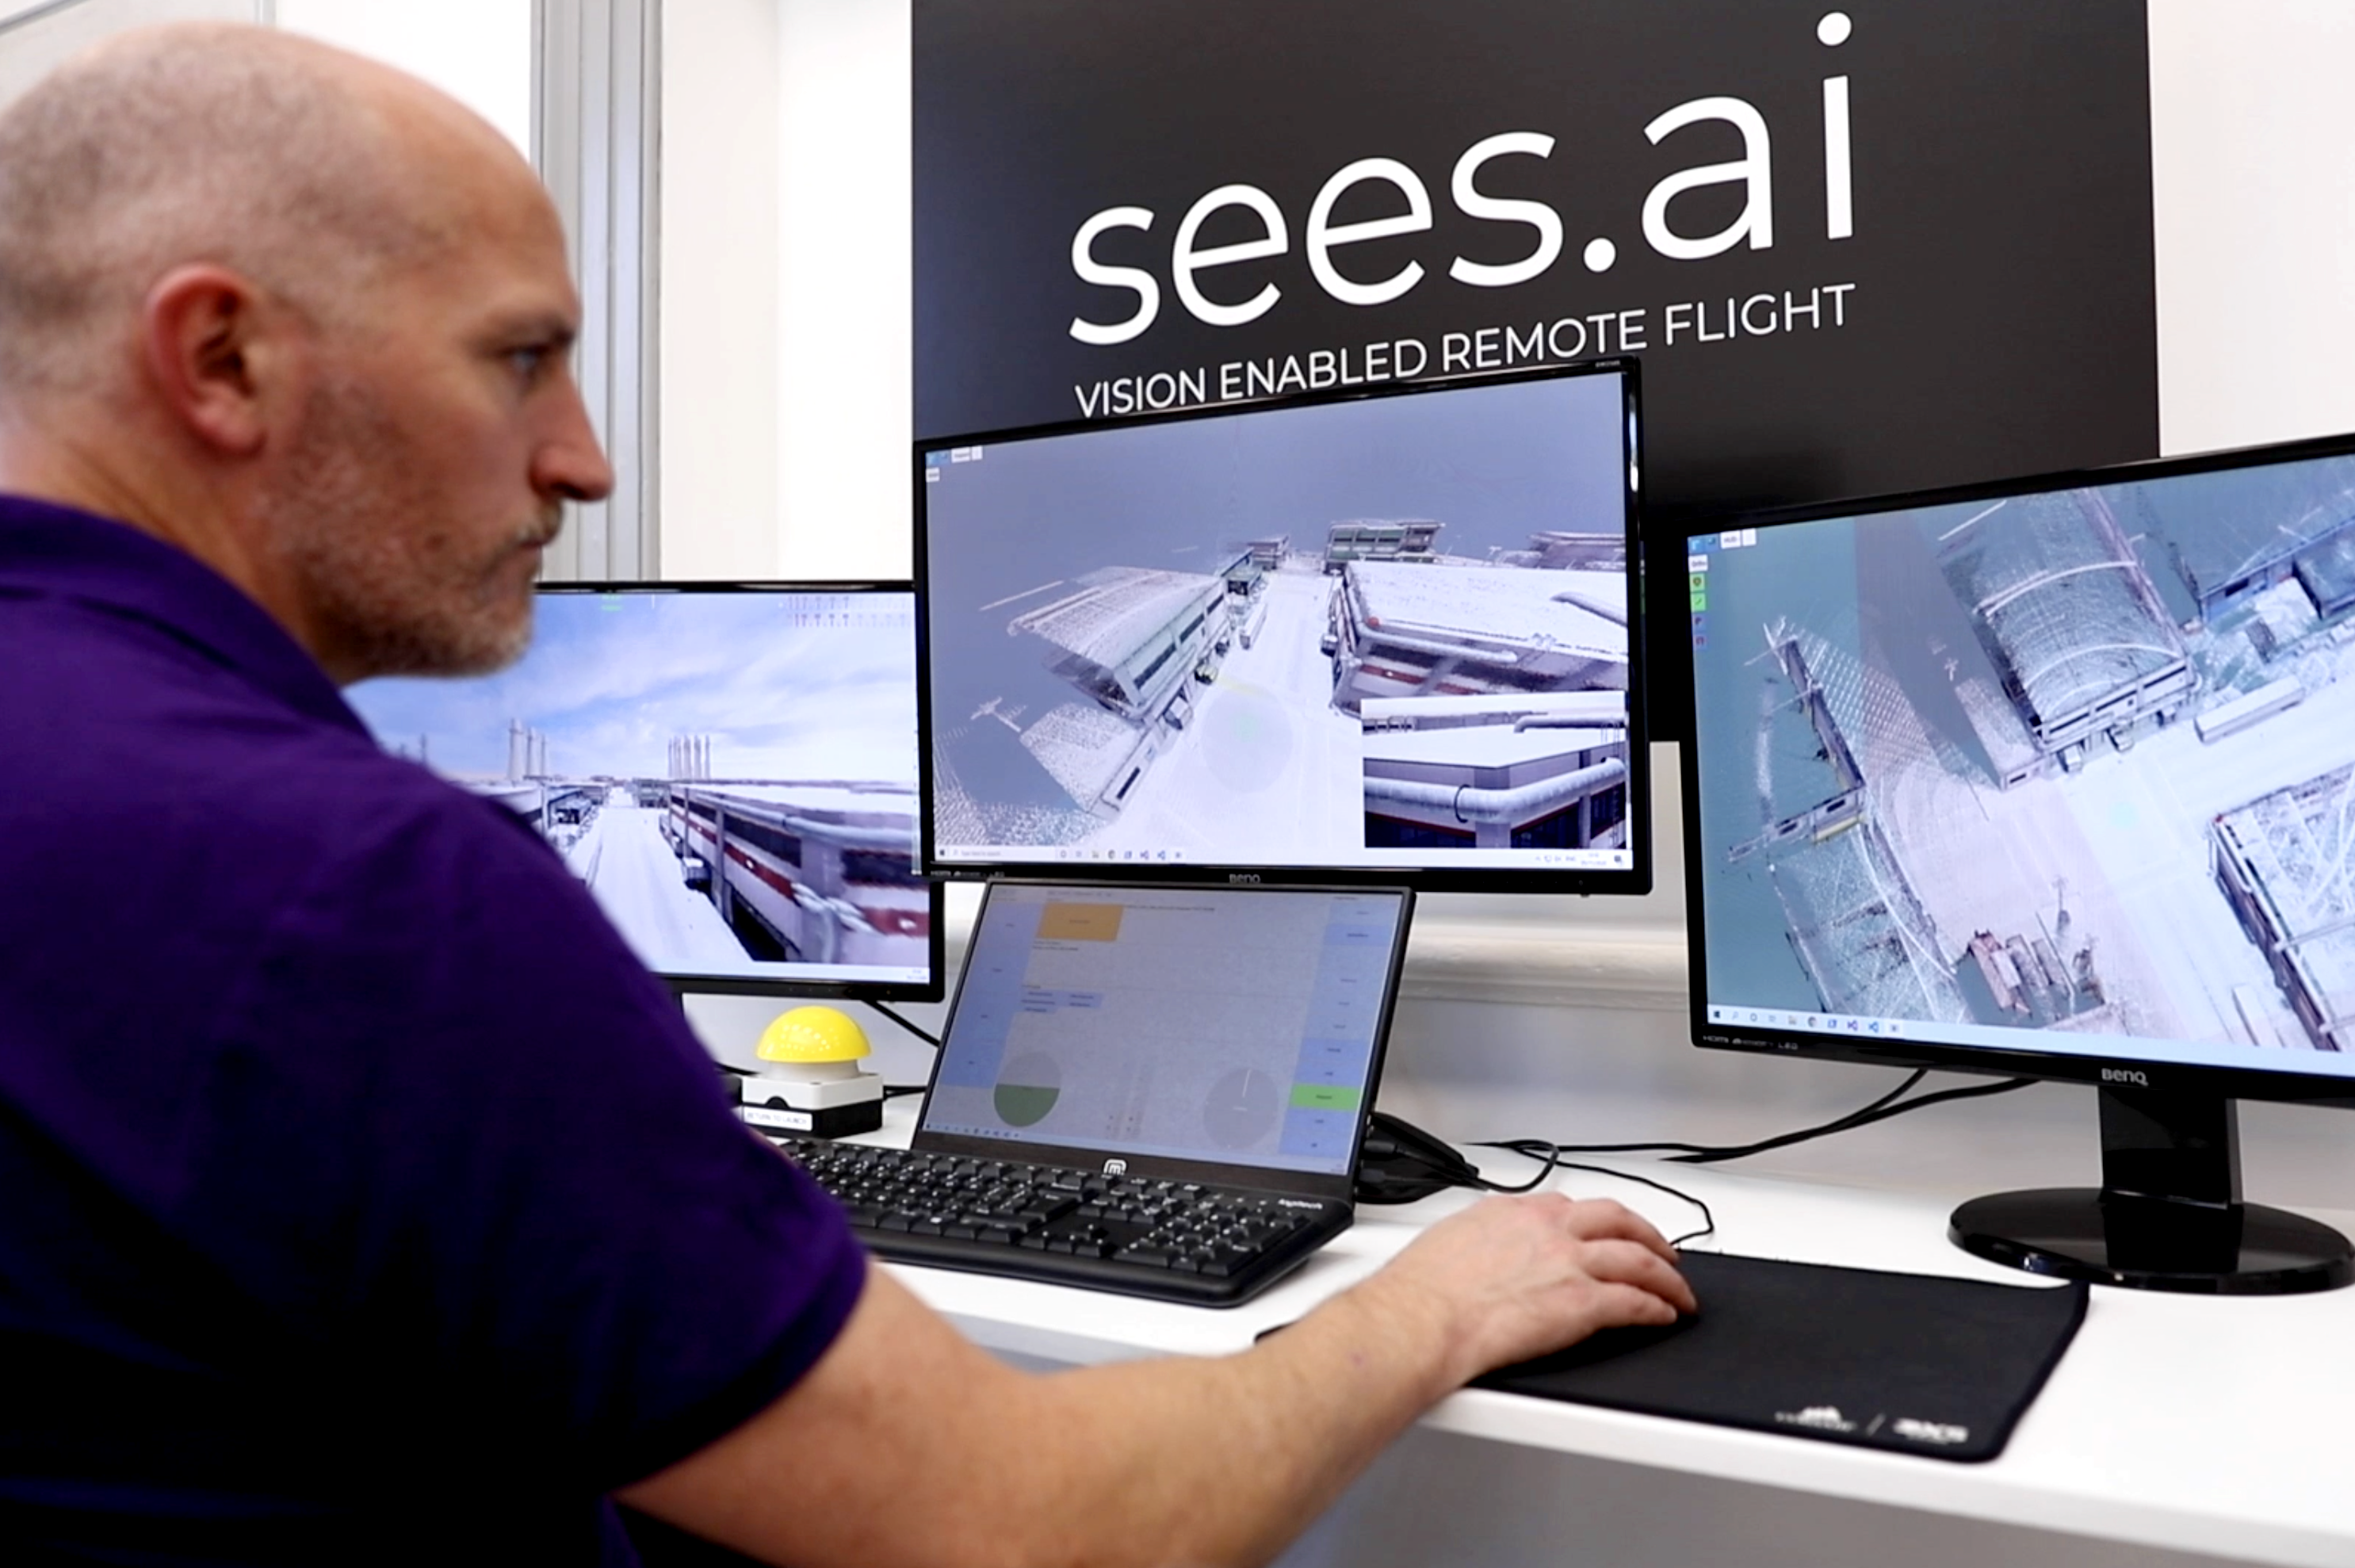 Sees.ai engineer remotely controlling drone in flight